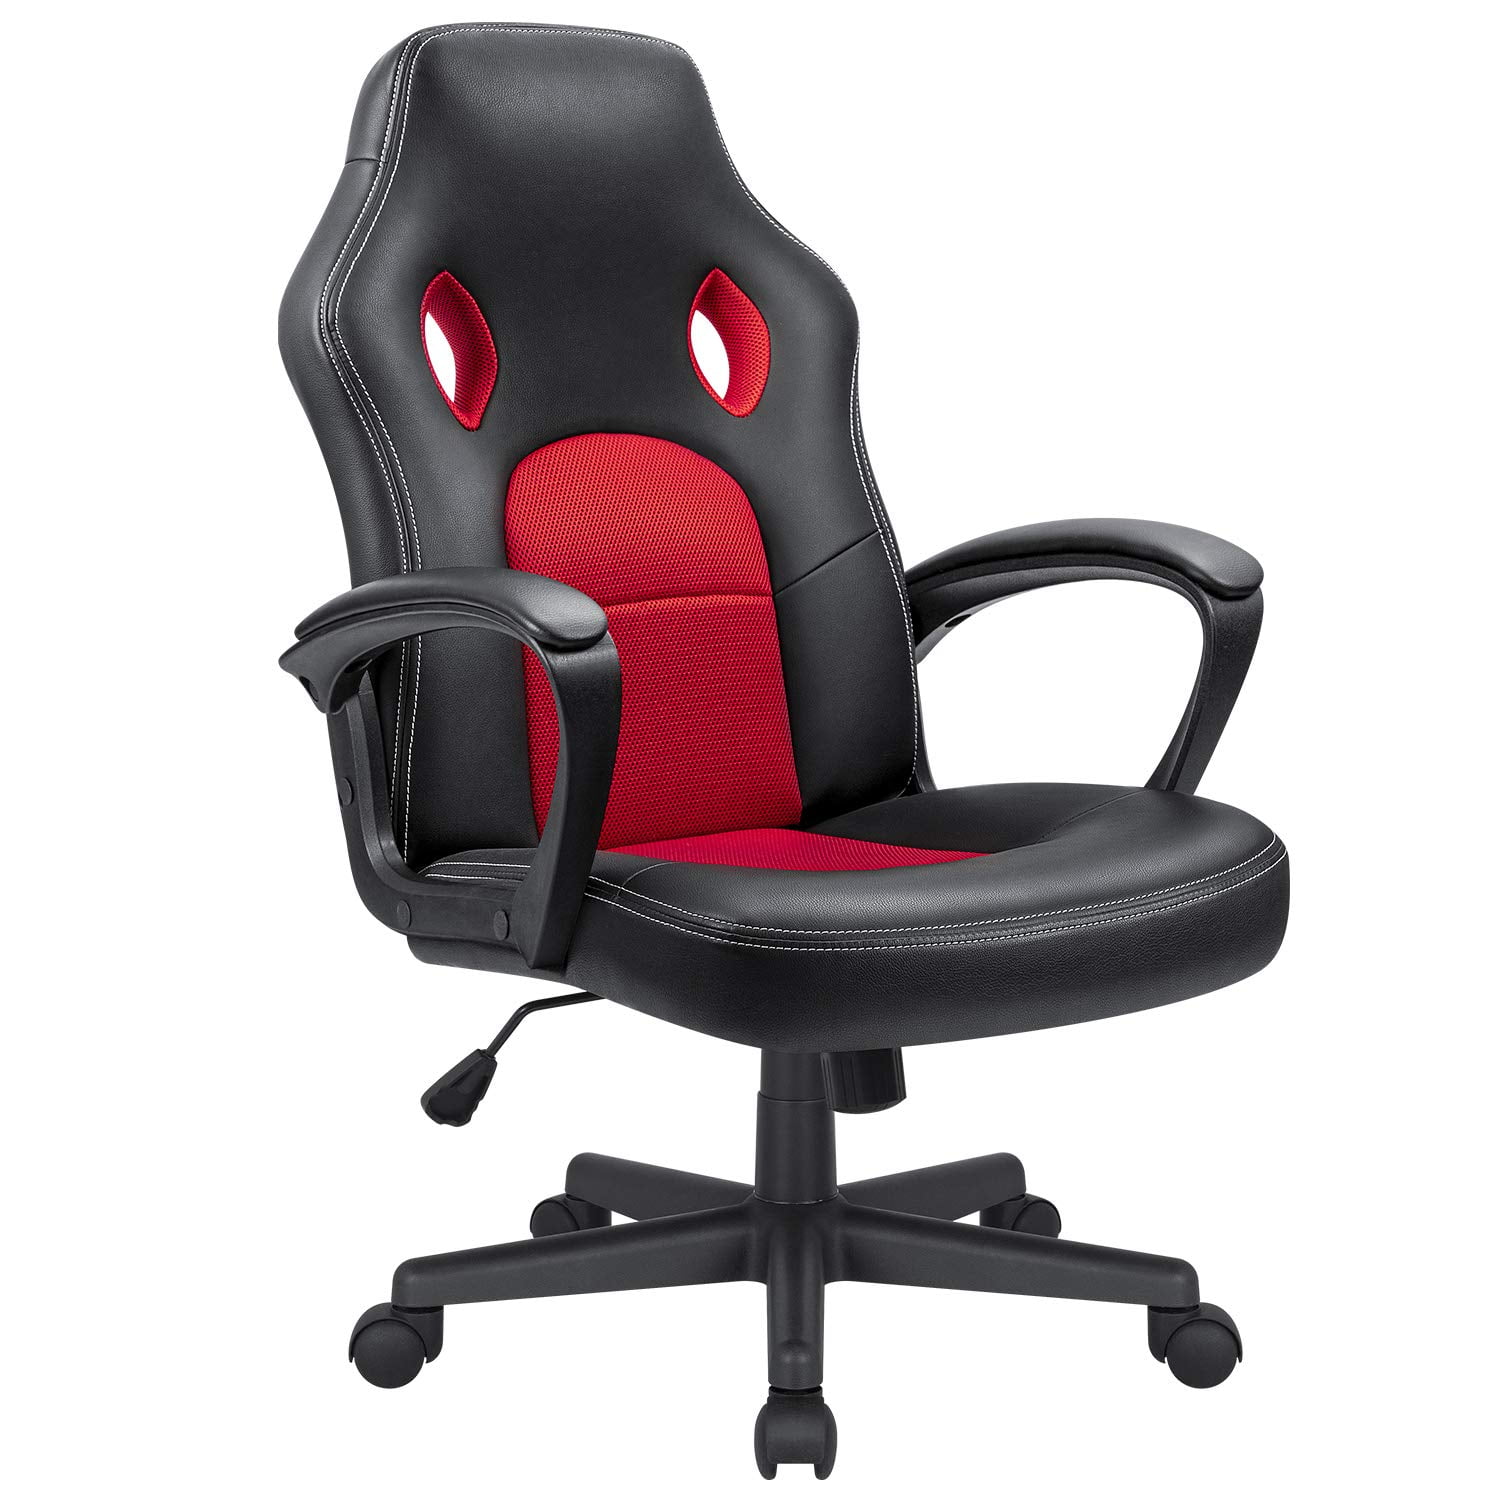 Minimalist Gaming Chairs For Office Chair for Small Space